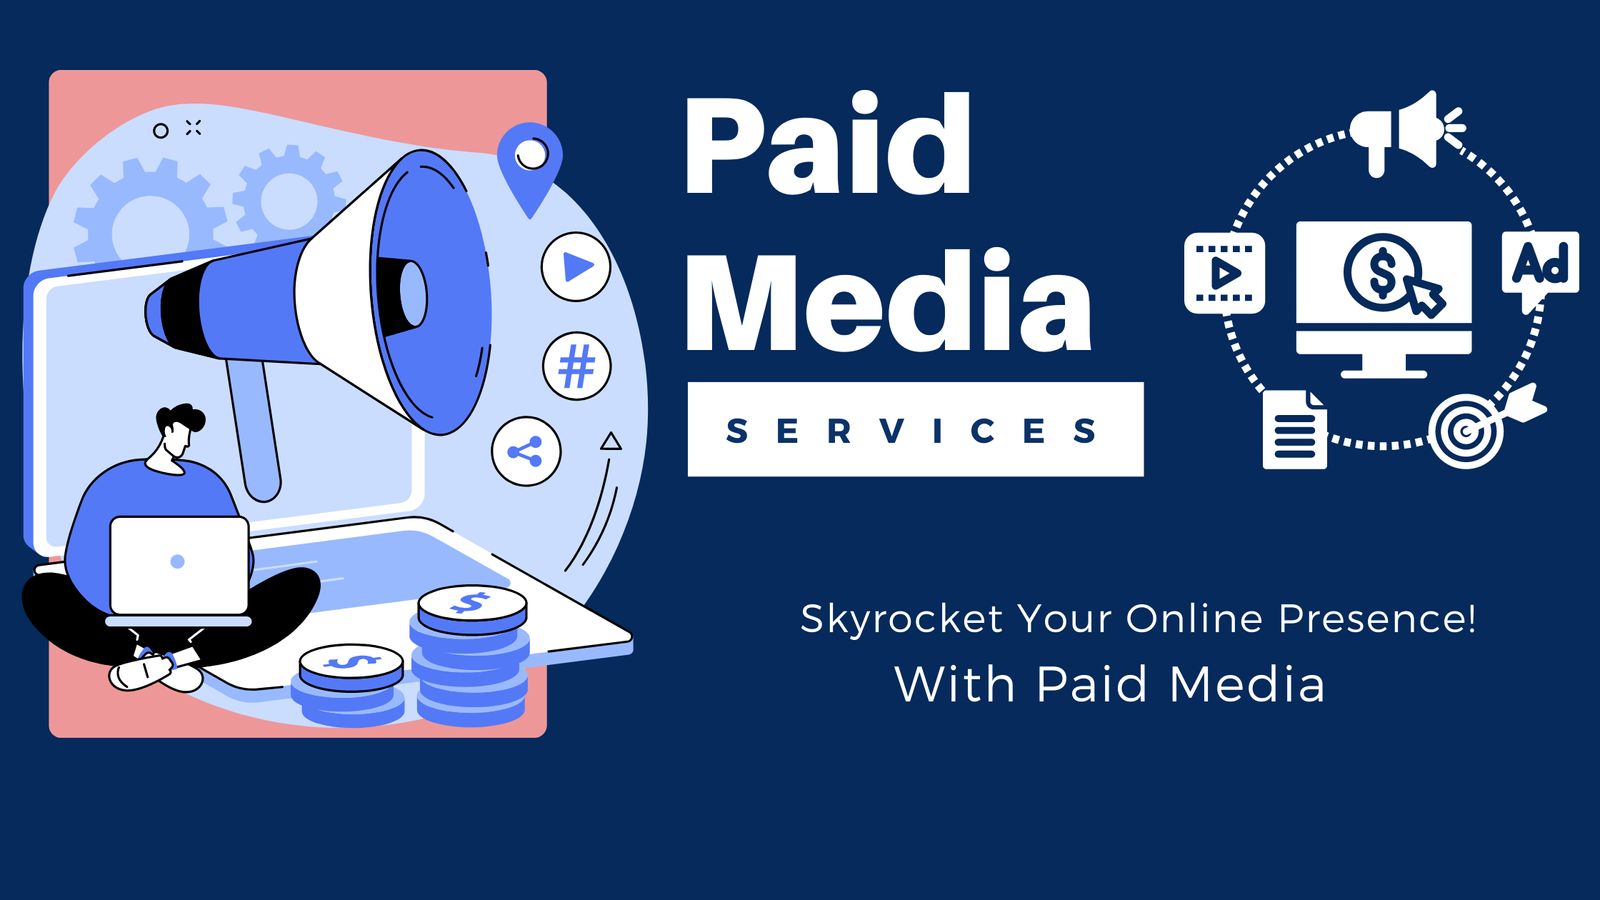 Paid media services